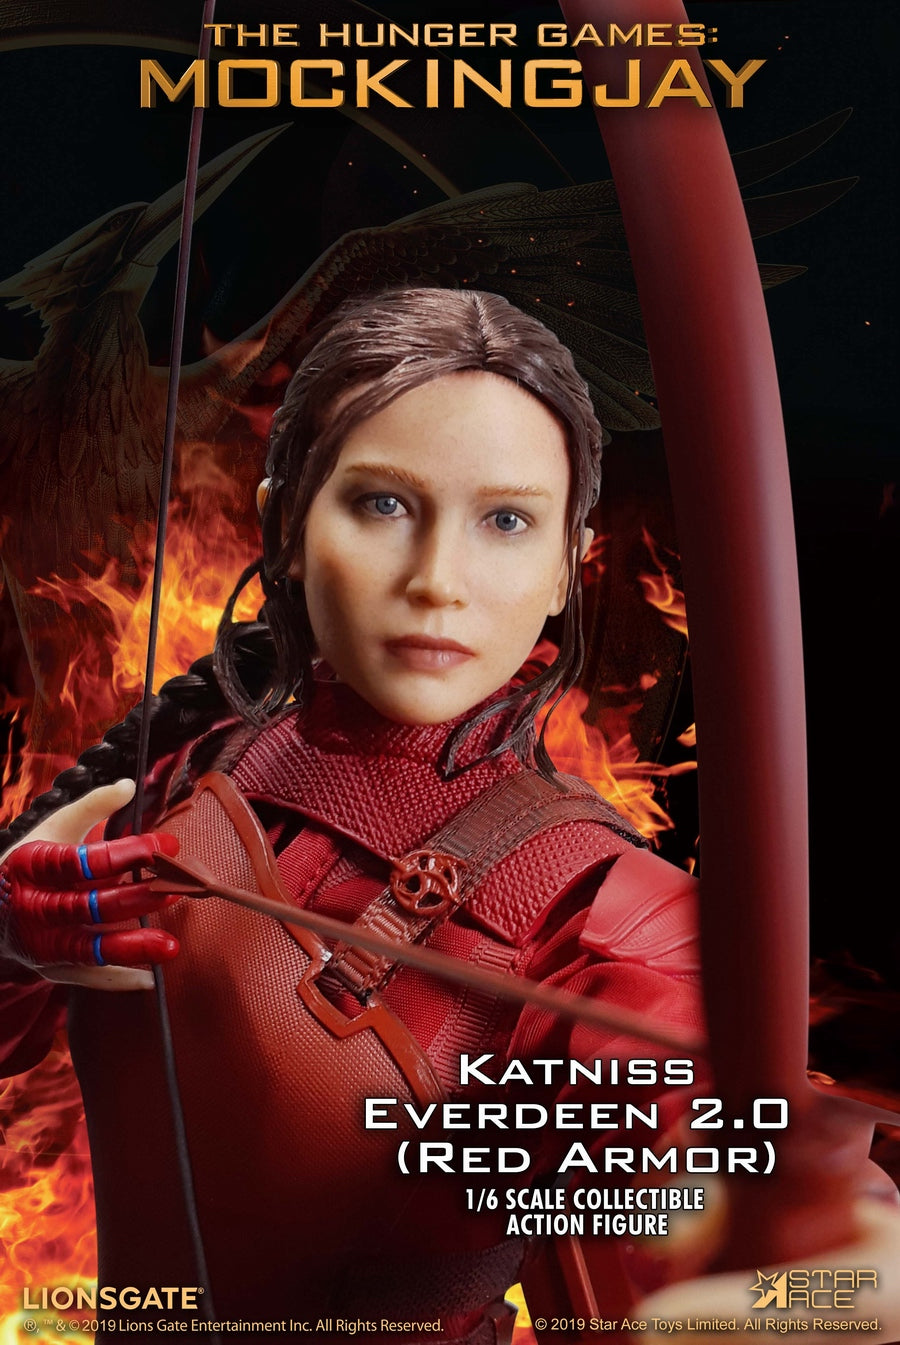 Star Ace Toys - The Hunger Games: Mockingjay - Katniss Everdeen (Red Armor) (1/6 Scale) - Marvelous Toys